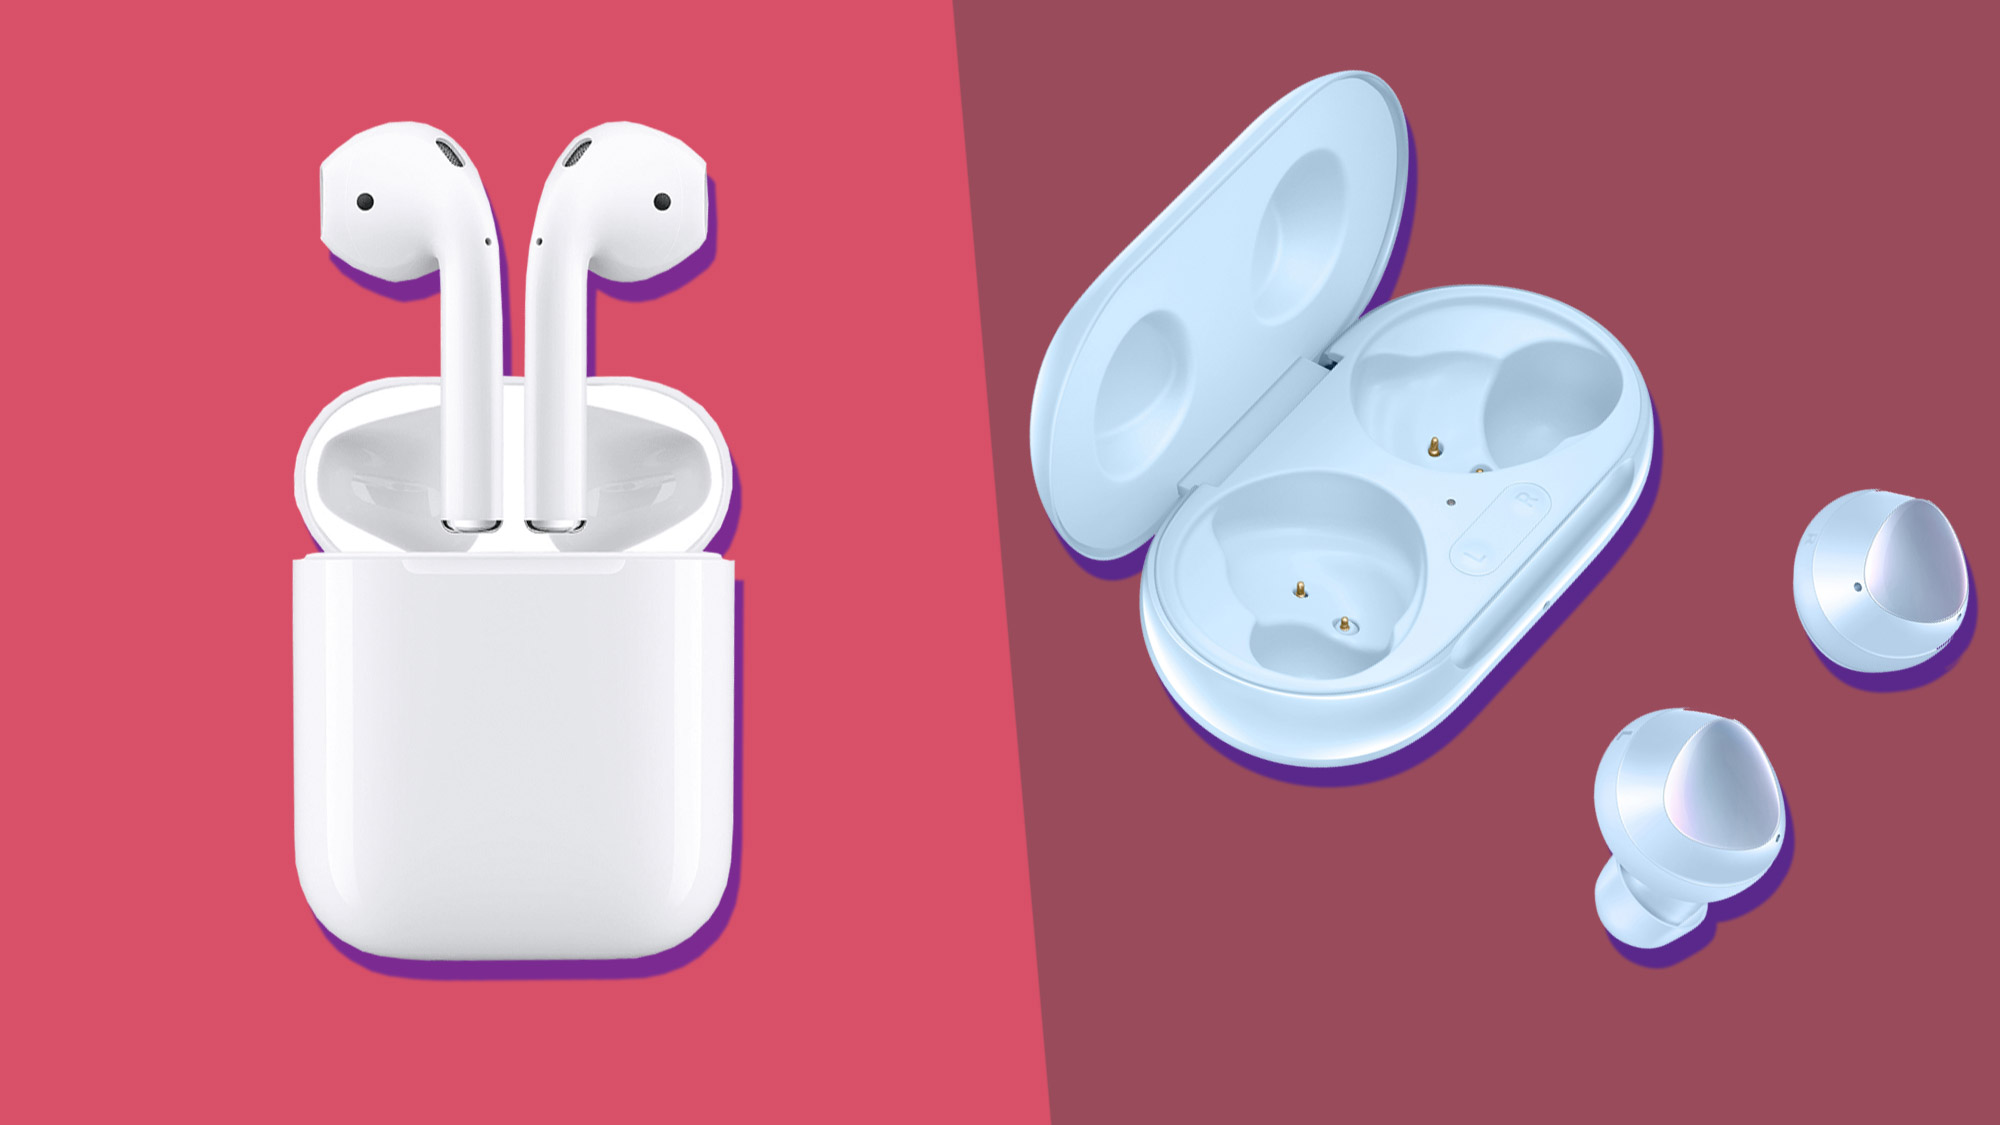 Apple AirPods vs Samsung Galaxy Buds Plus: which are the best true